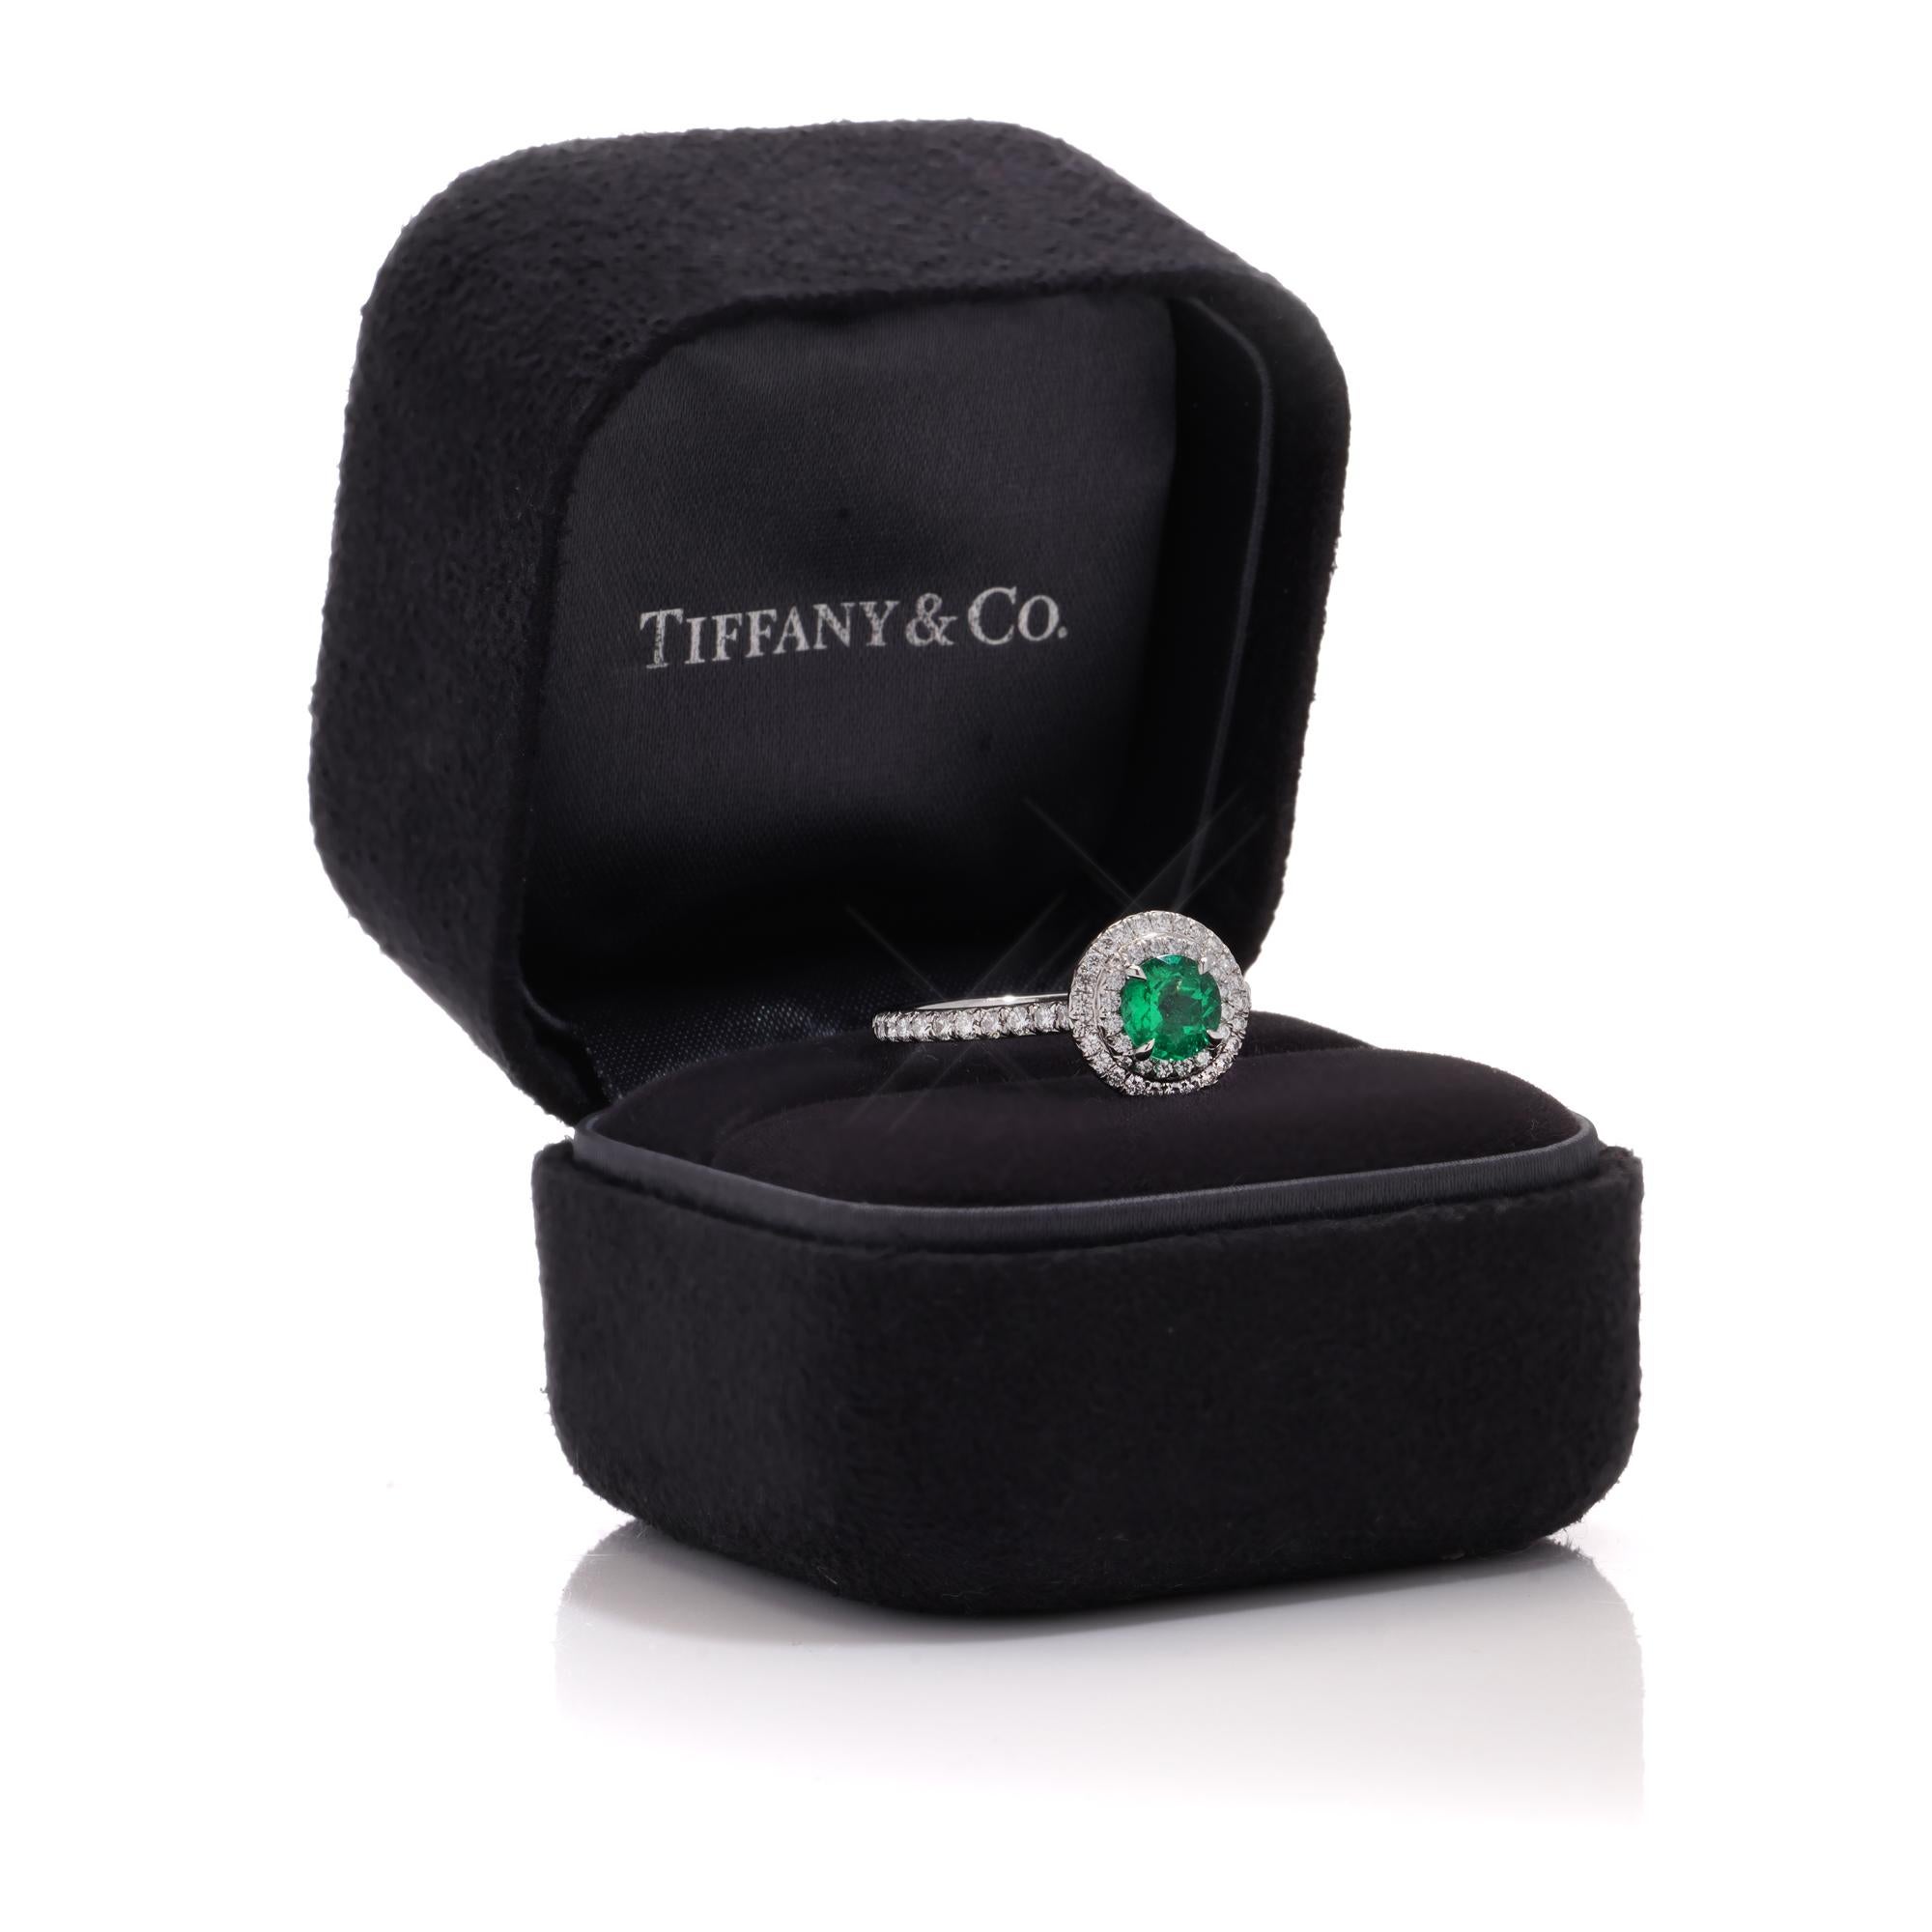 Tiffany & Co ladies platinum emerald and diamond ring.
Maker: Tiffany & Co.
Fully hallmarked.

Approx. Dimensions -
Size: 2.7 x 2 x 1 cm
Finger Size (UK) = N (US) = 7 (EU) = 54
Weight: 4.28 grams

Emerald - 
Size: 0.60 cts
Cut: Round brilliant